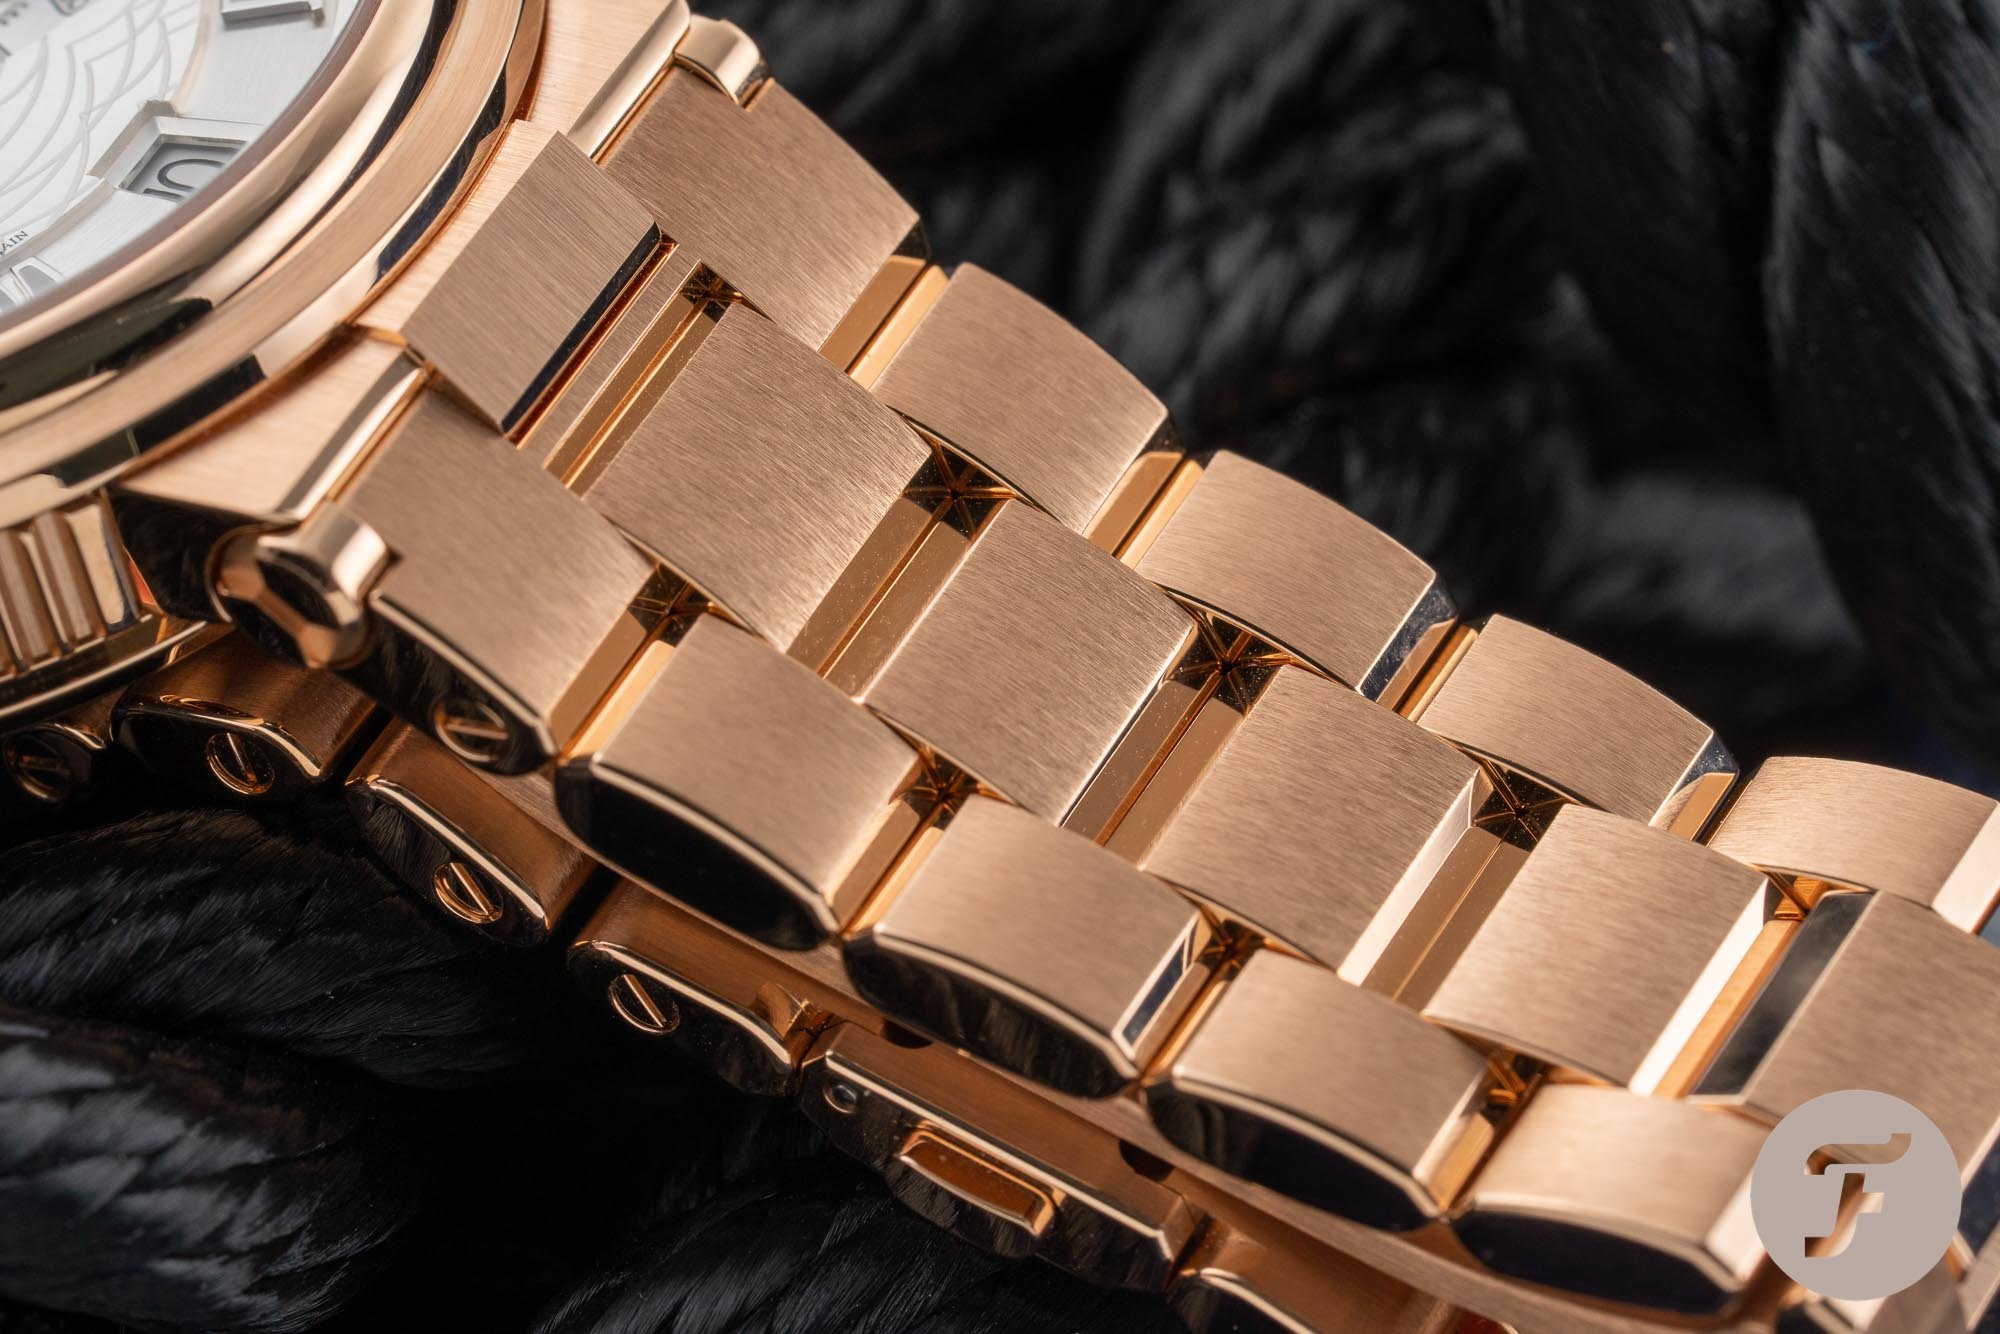 Jubilee, Bonklip and More: 8 Best Watch Bracelets to Know